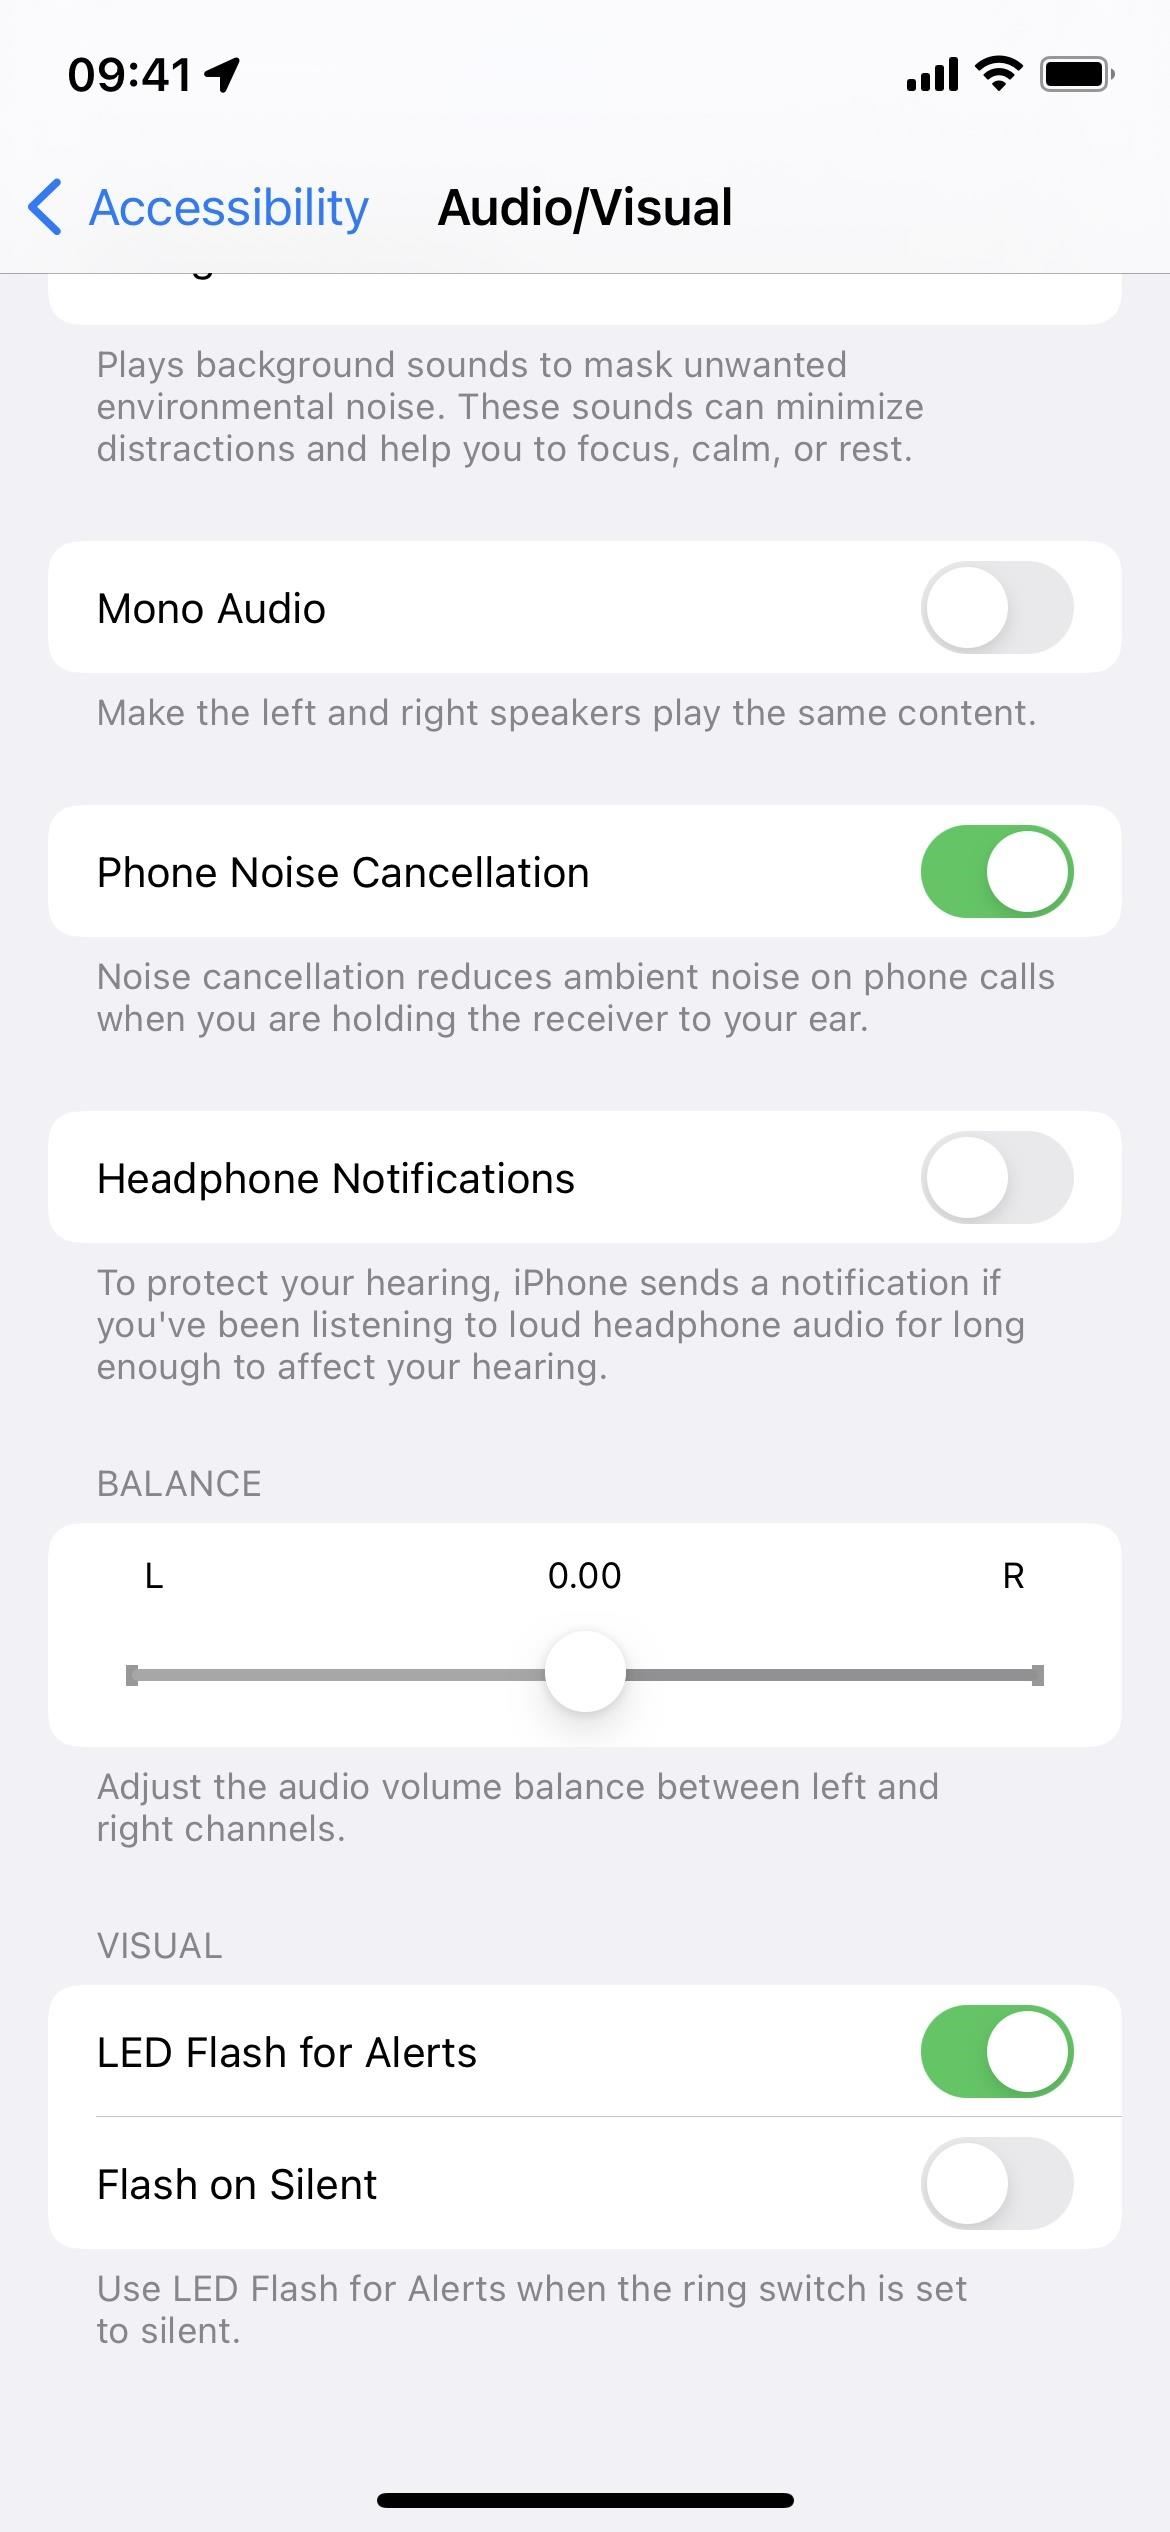 How to Change the Default Snooze Time on Your iPhone's Alarm Clock